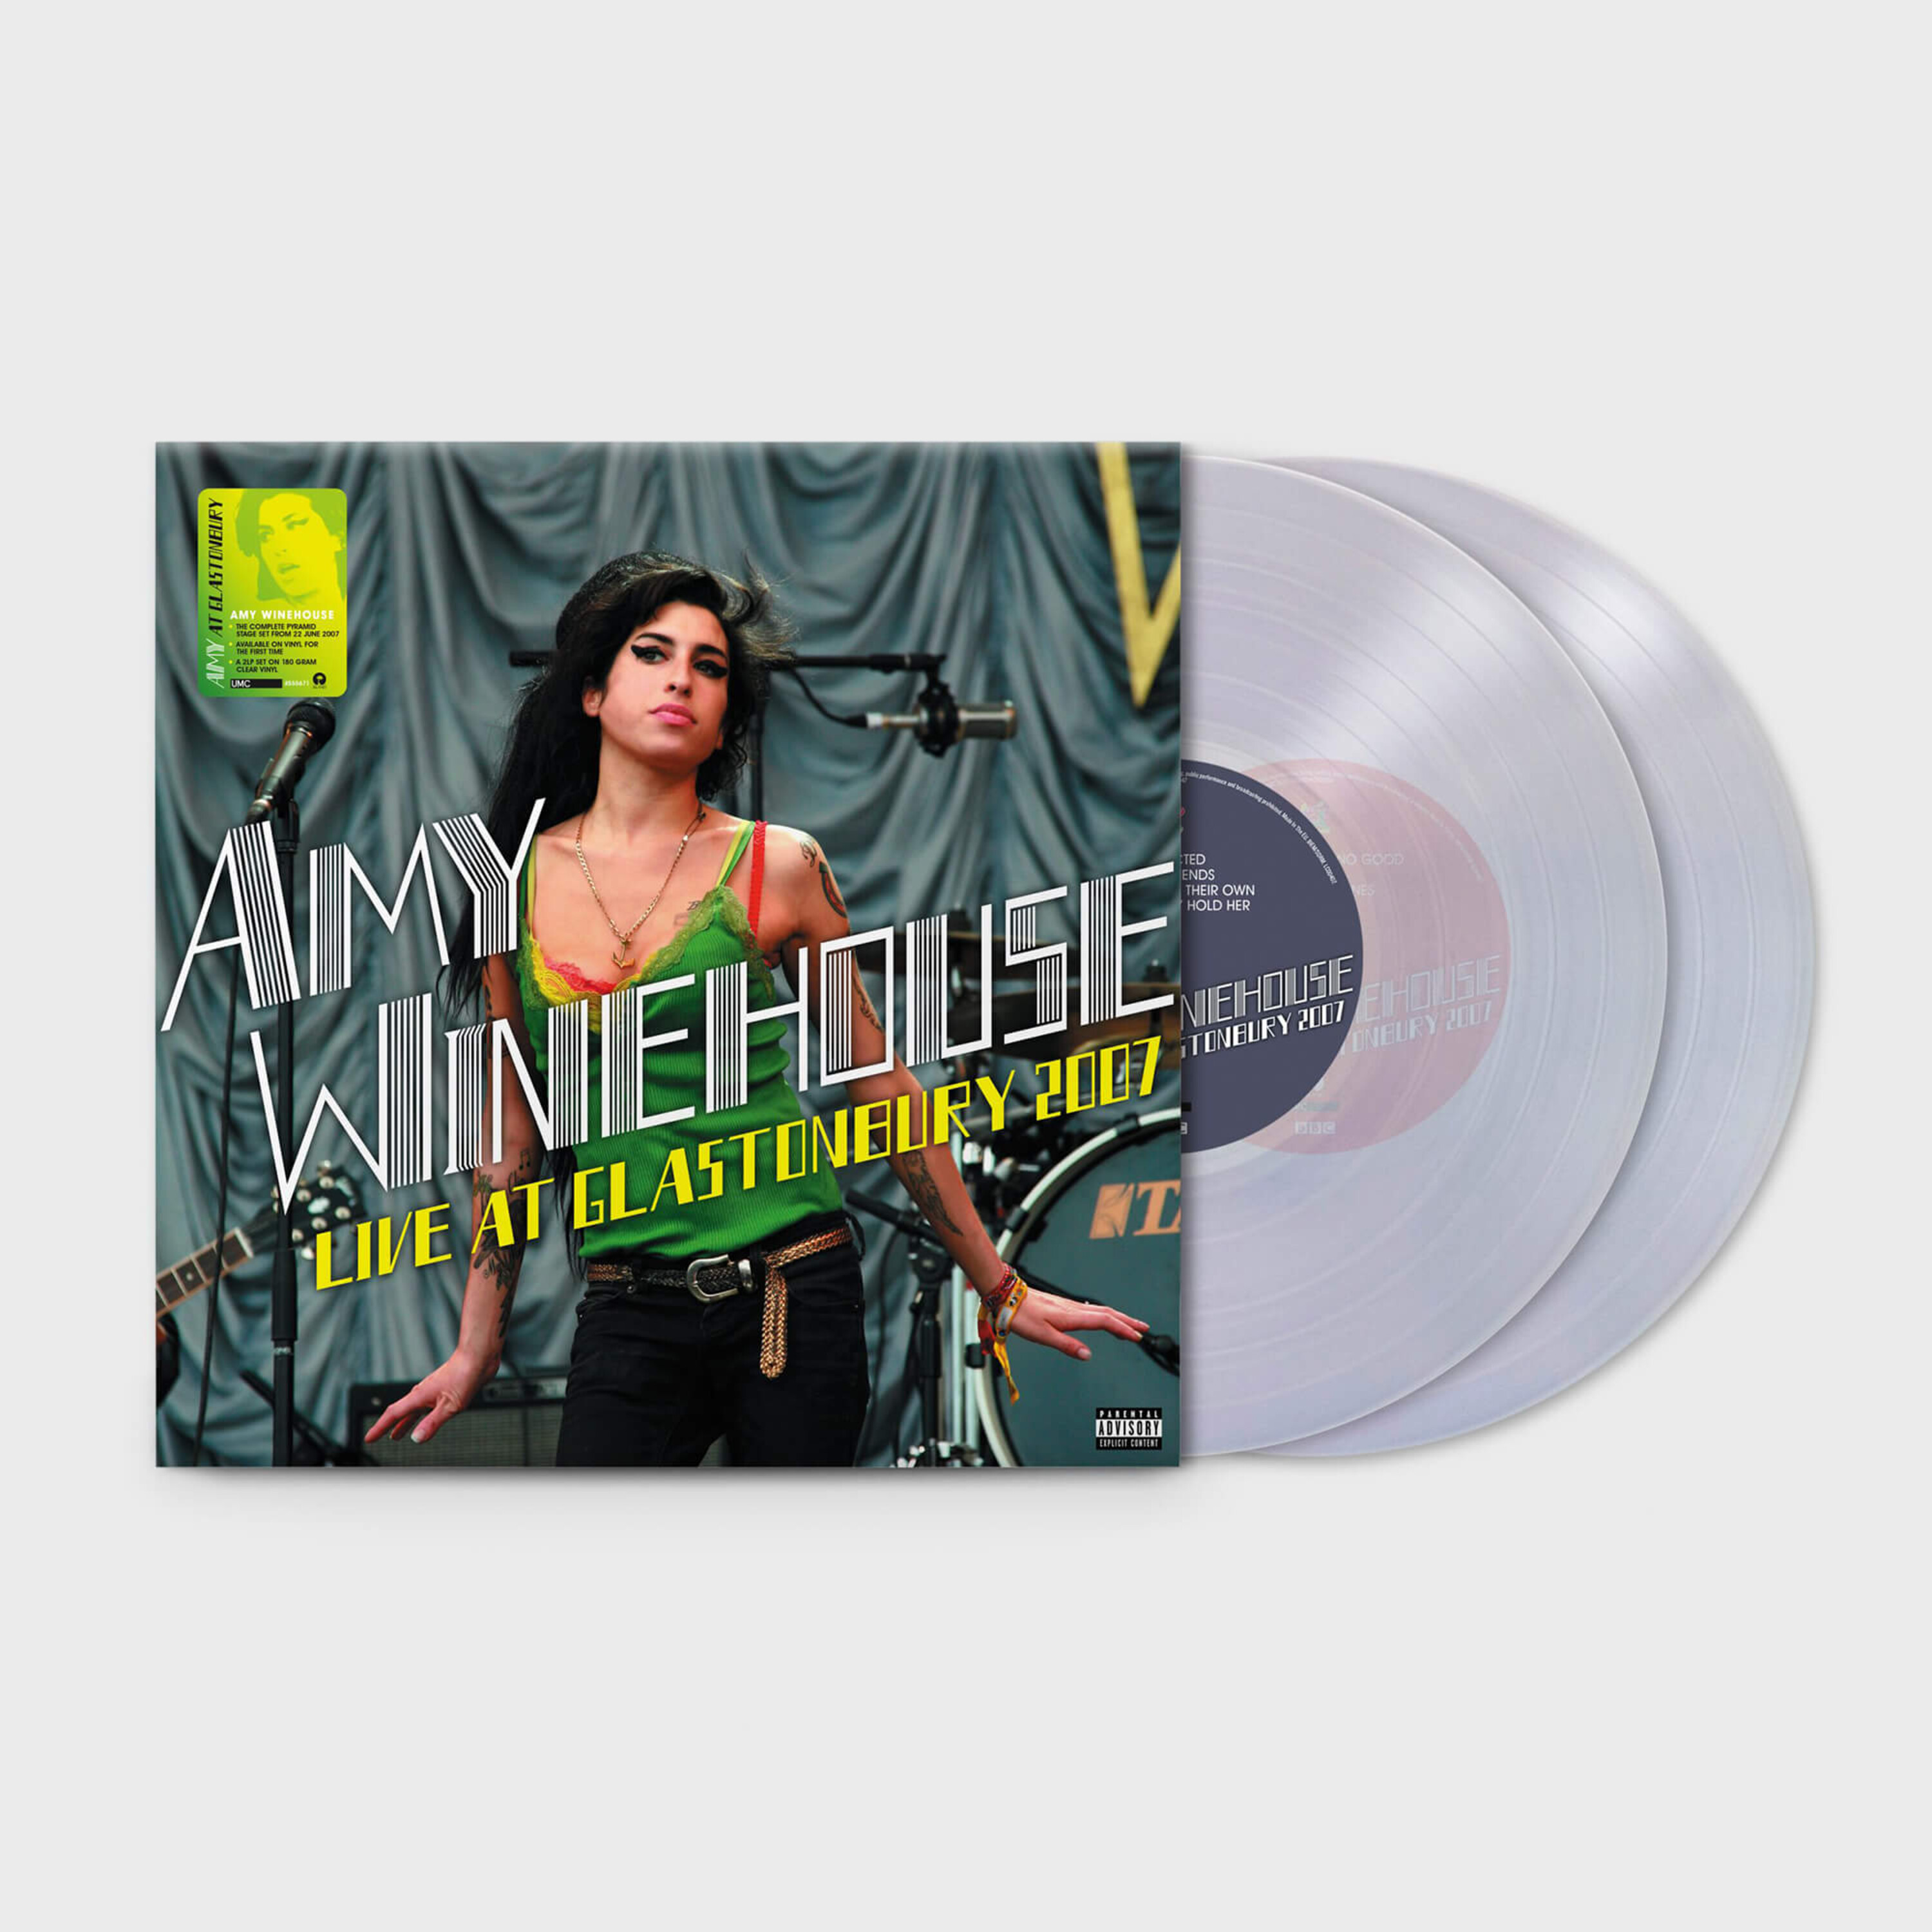 Amy Winehouse - Live At Glastonbury 2007 (Excl. Ltd. Crystal Clear 2LP)